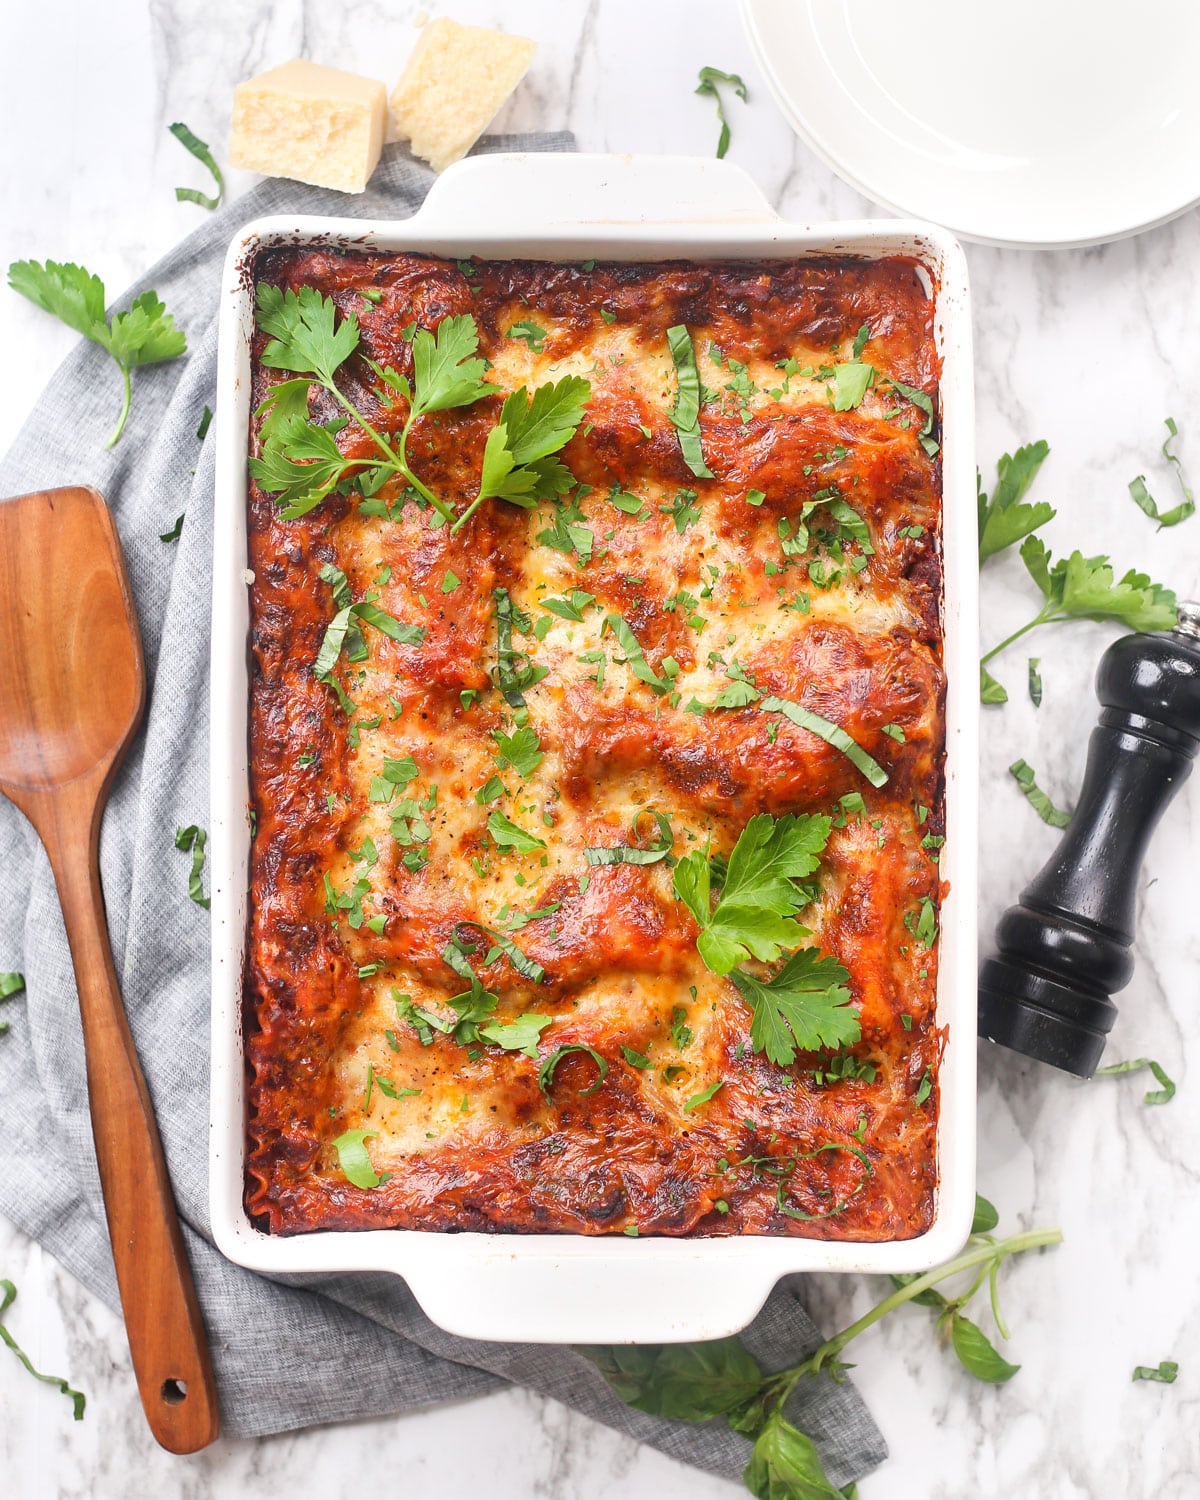 a casserole dish of lasagna garnished with fresh parsley and basil